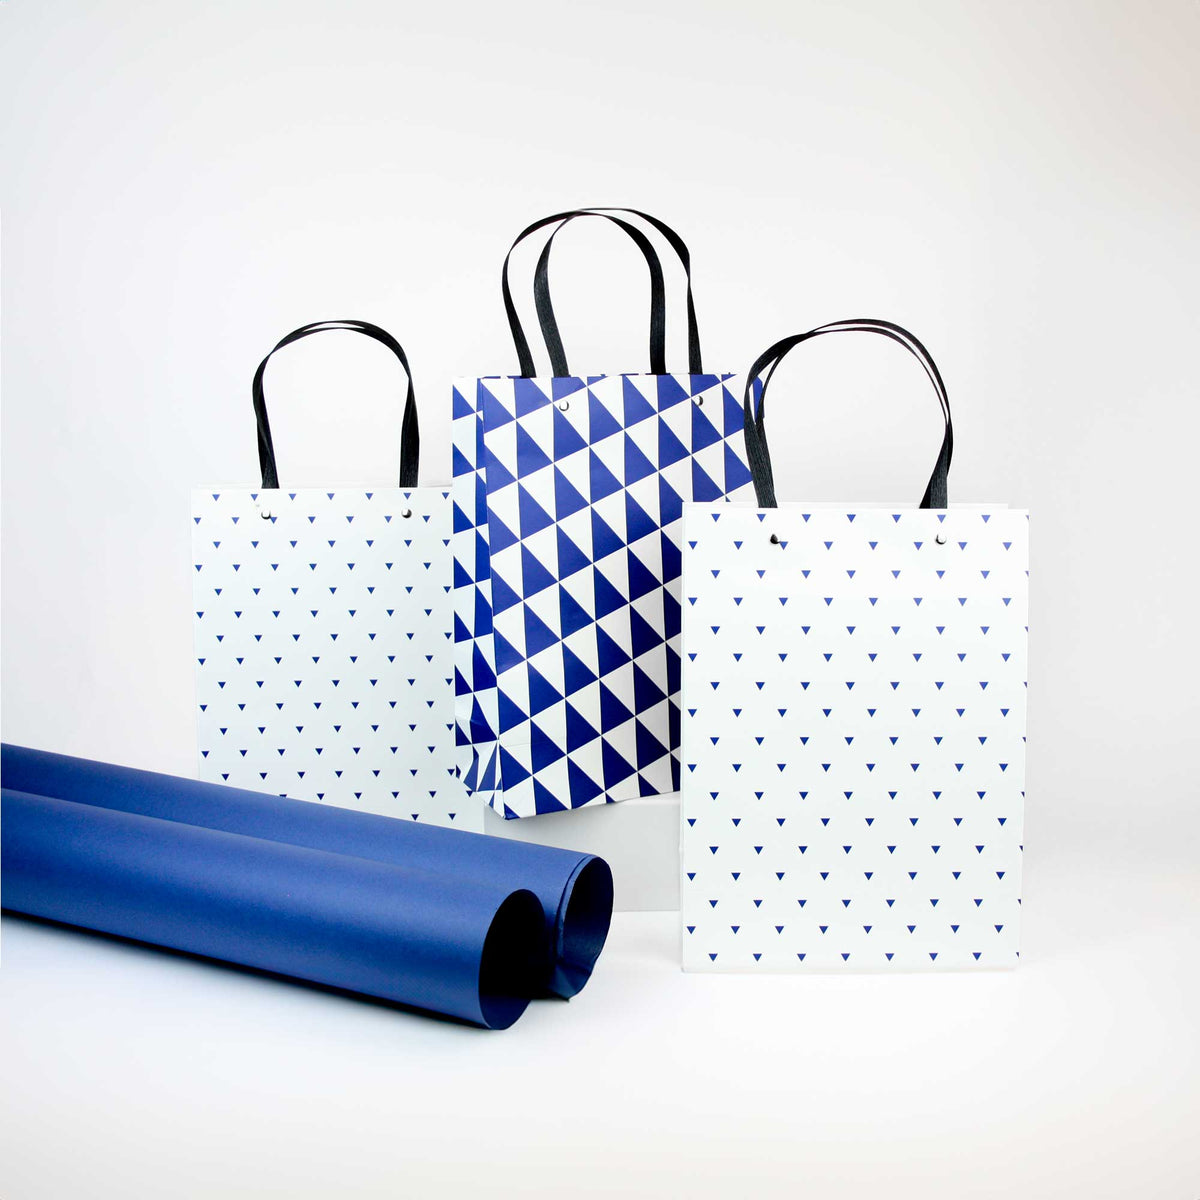 Chic Geometric Patterned Gift Bags - Set Of 3, Blue And White